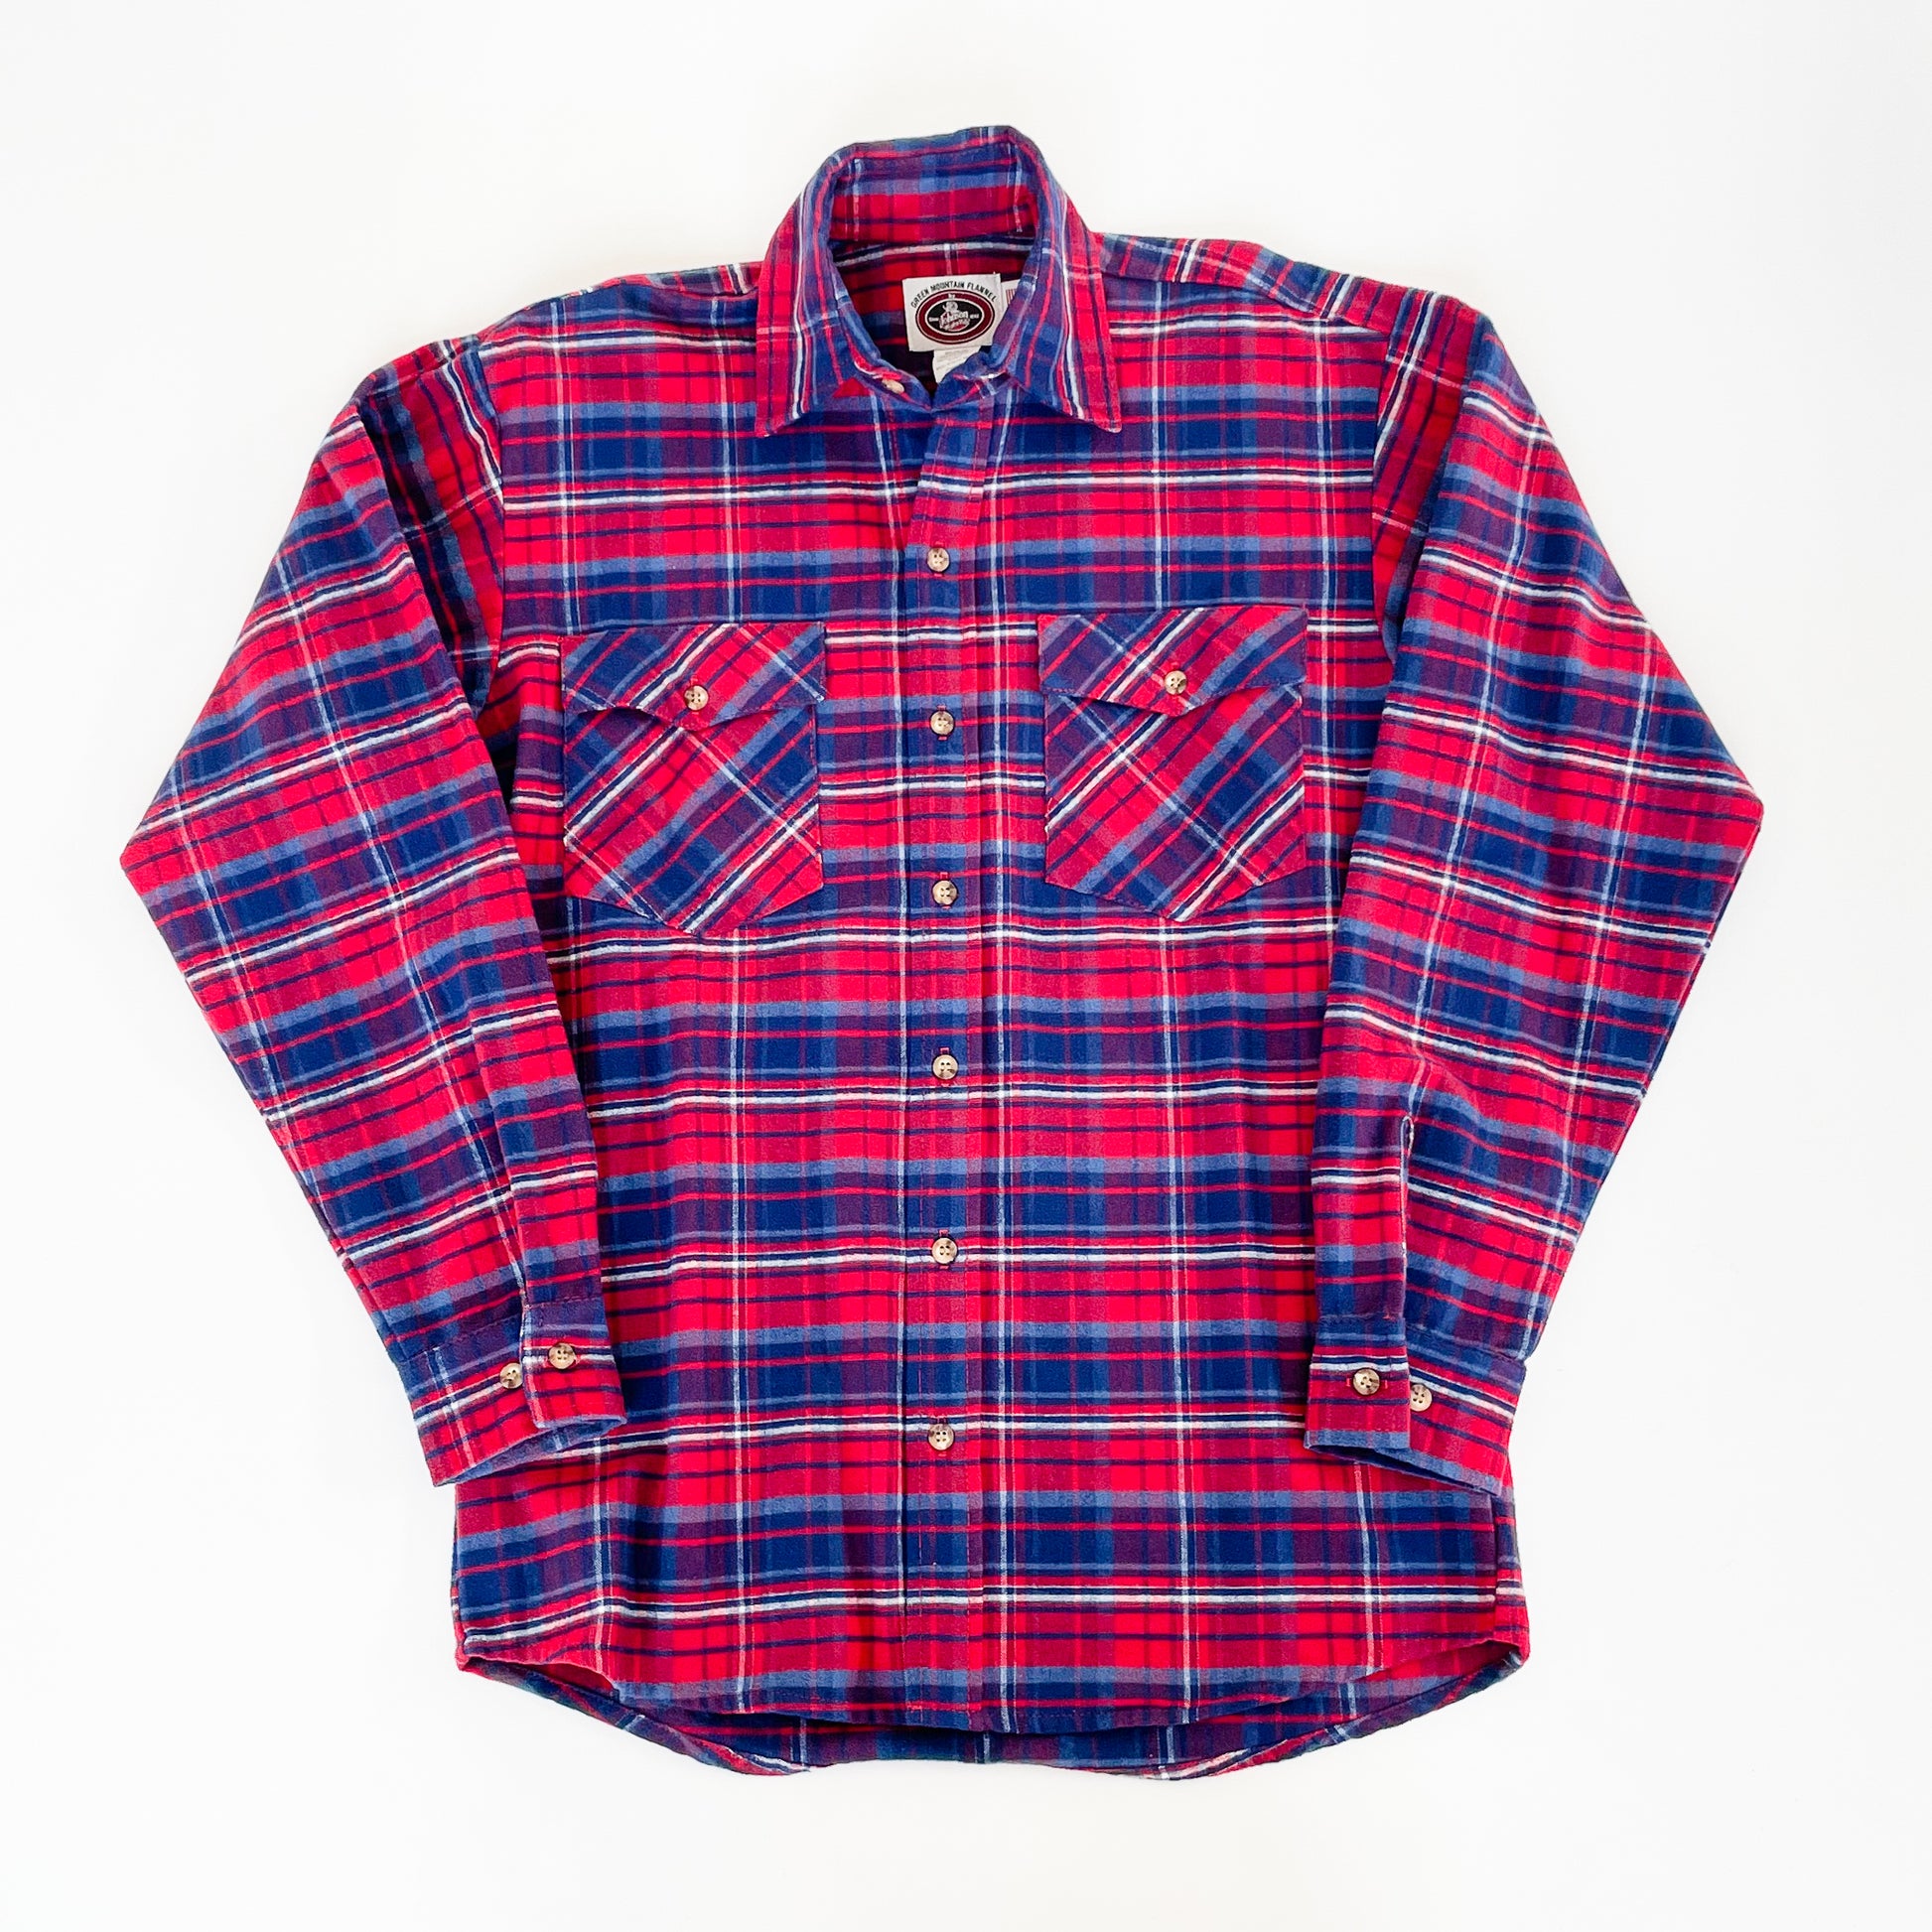 Green Mountain Flannel Men's Button long tail shirt, Old Glory, red/pink/blue stripes front view